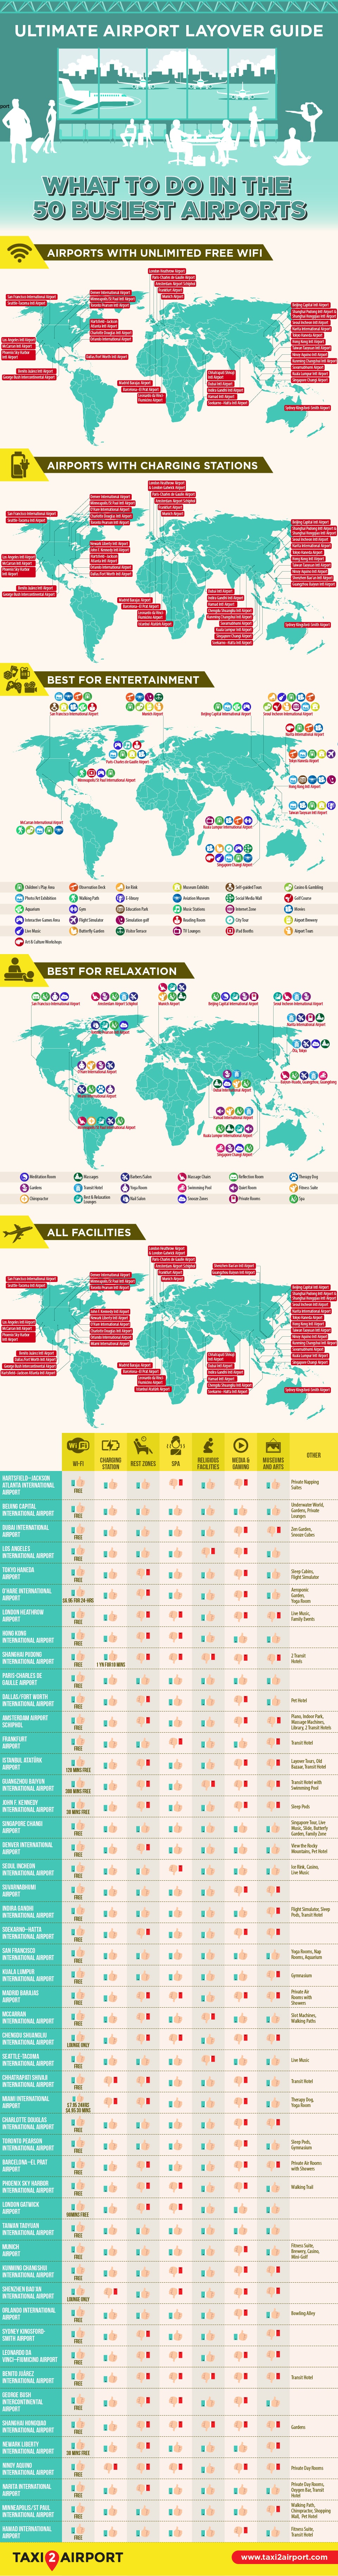 Ultimate Airport Layover Guide Infographic